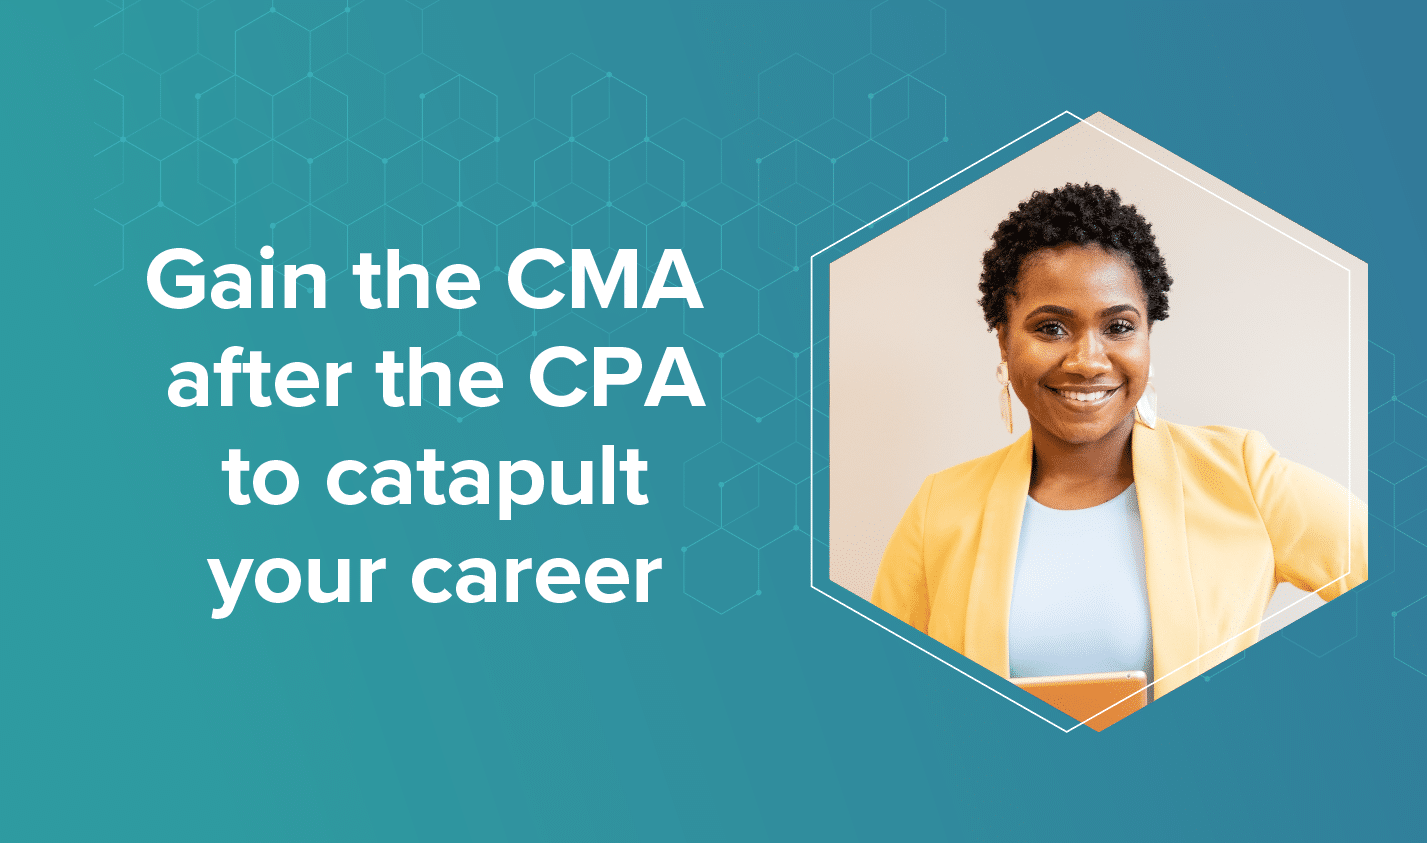 Gain the CMA after the CPA to catapult your career